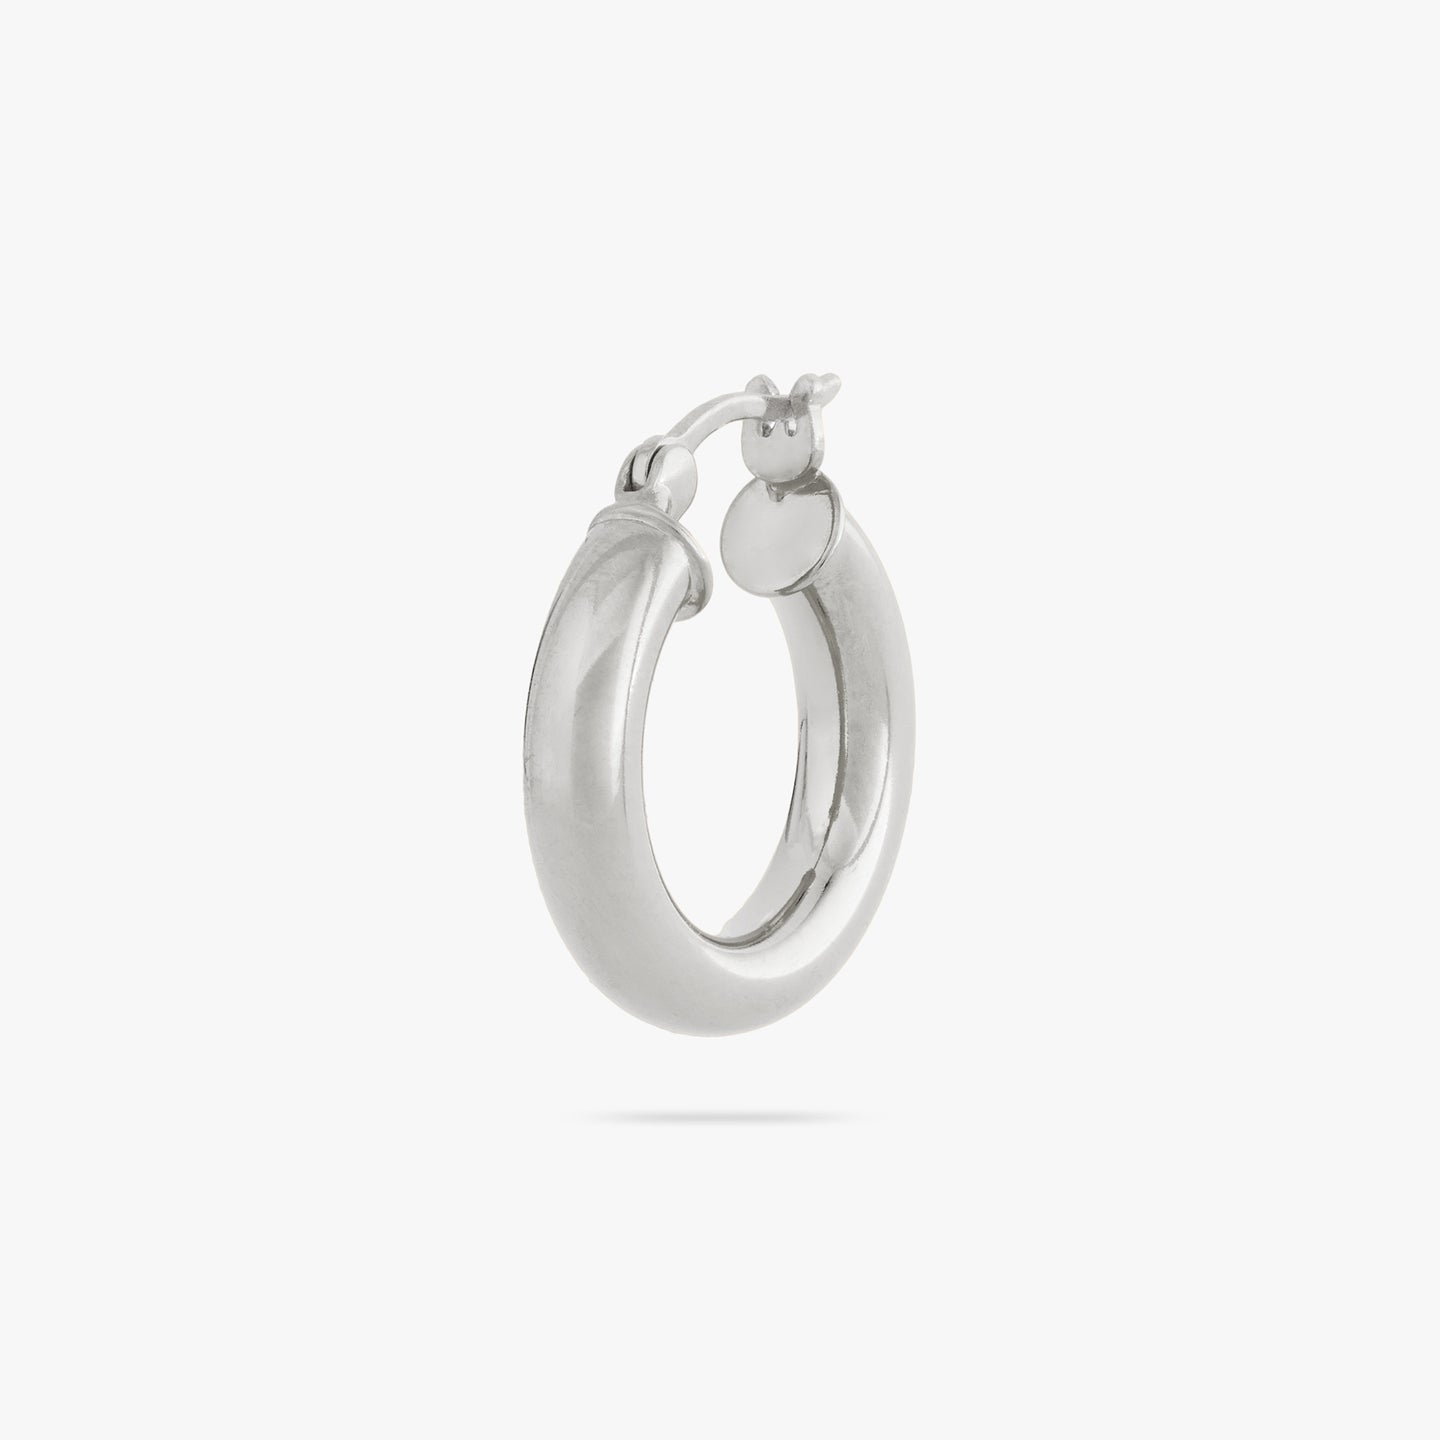 This is a small silver chunky tube hoop color:null|silver